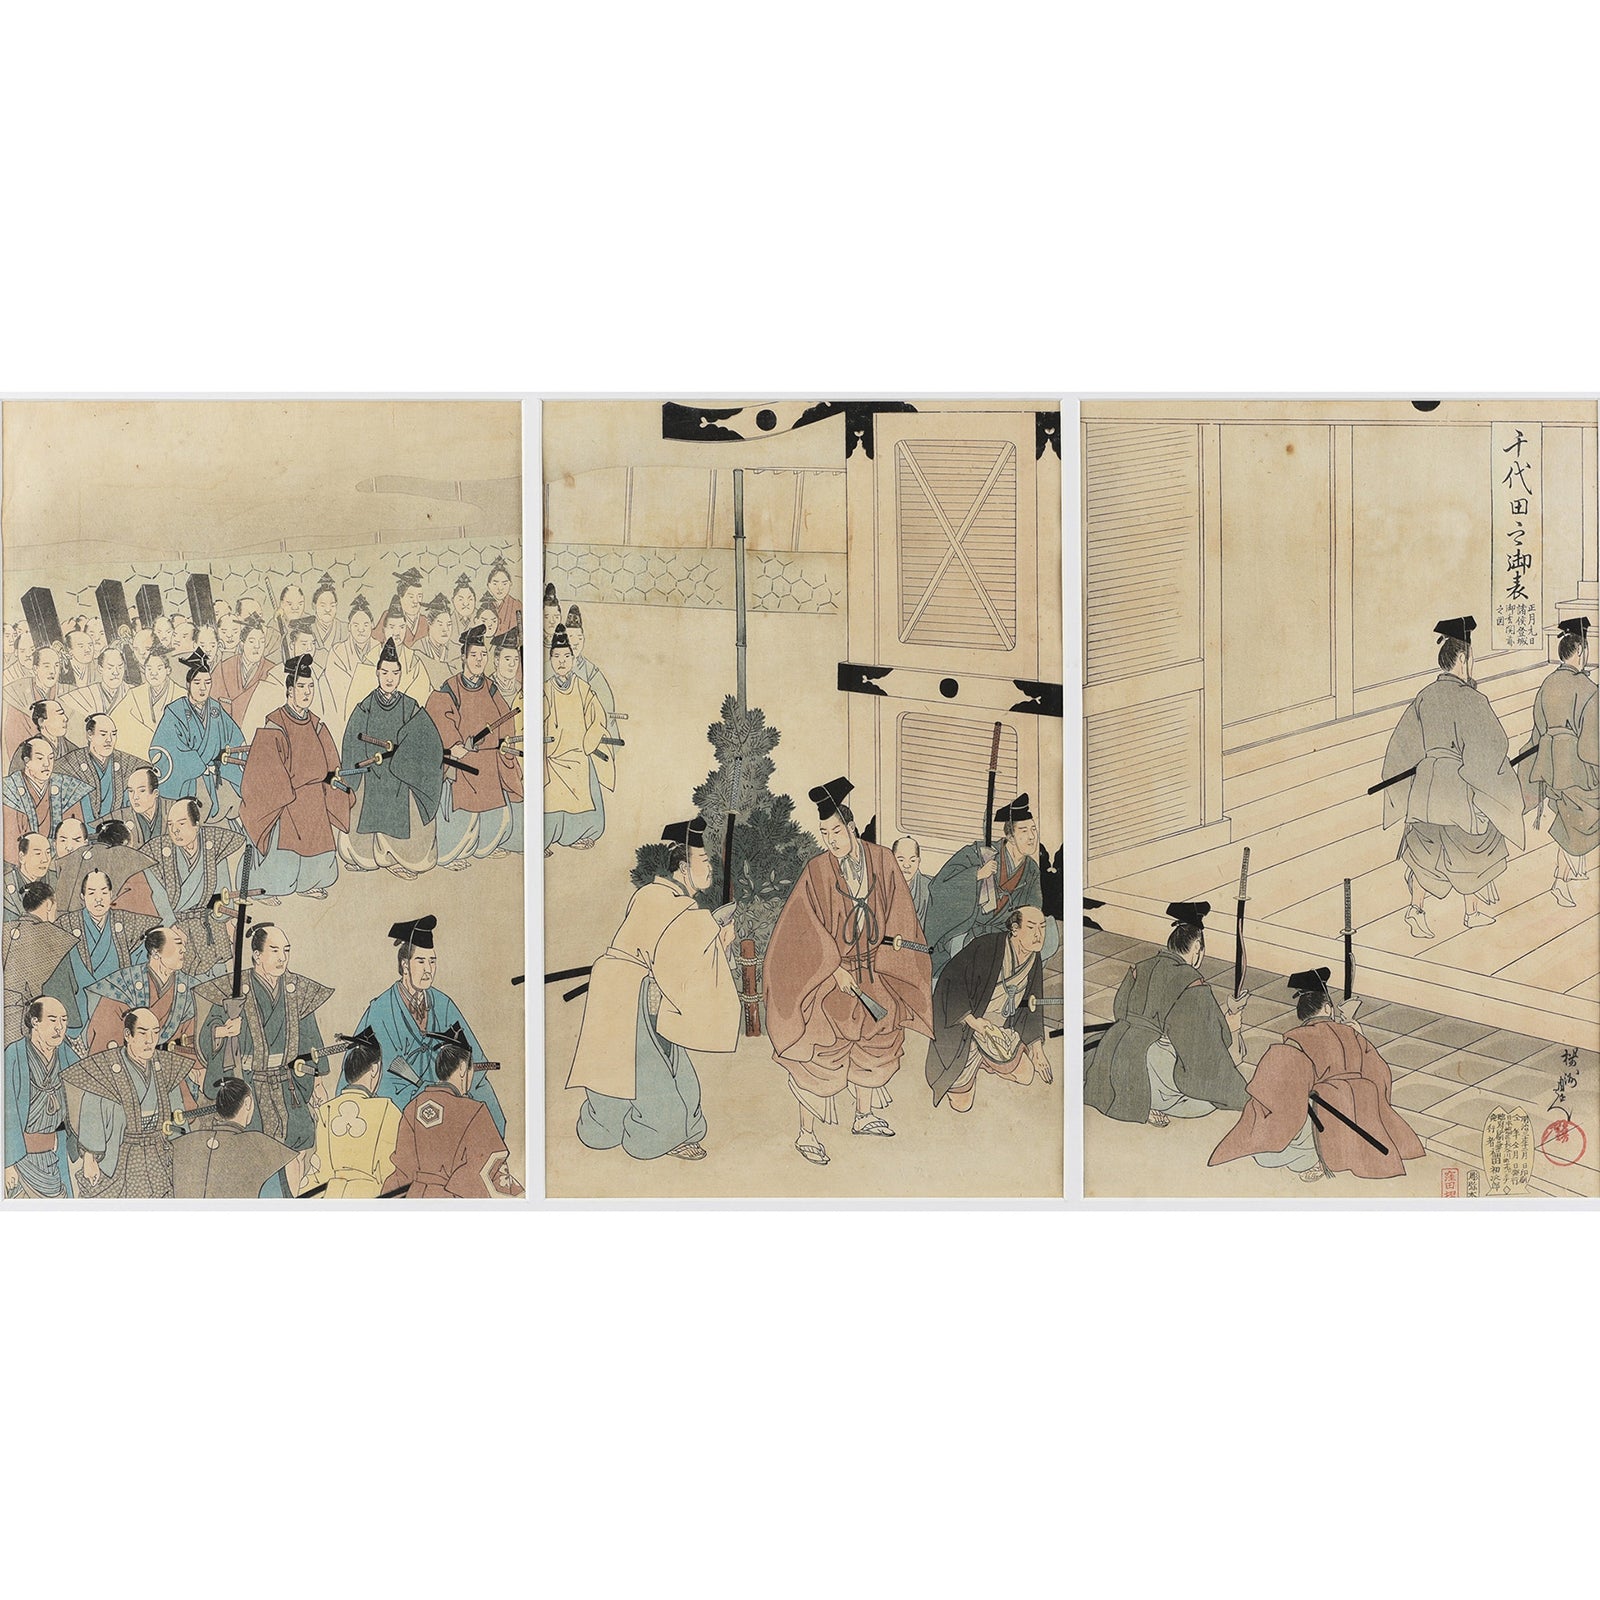 'Visiting Edo Castle on New Years Day' Original Woodblock by Toyohara Chikanobu From the Series 'The Outer Palace of Chiyoda' - Ca 1897 | Indigo Antiques